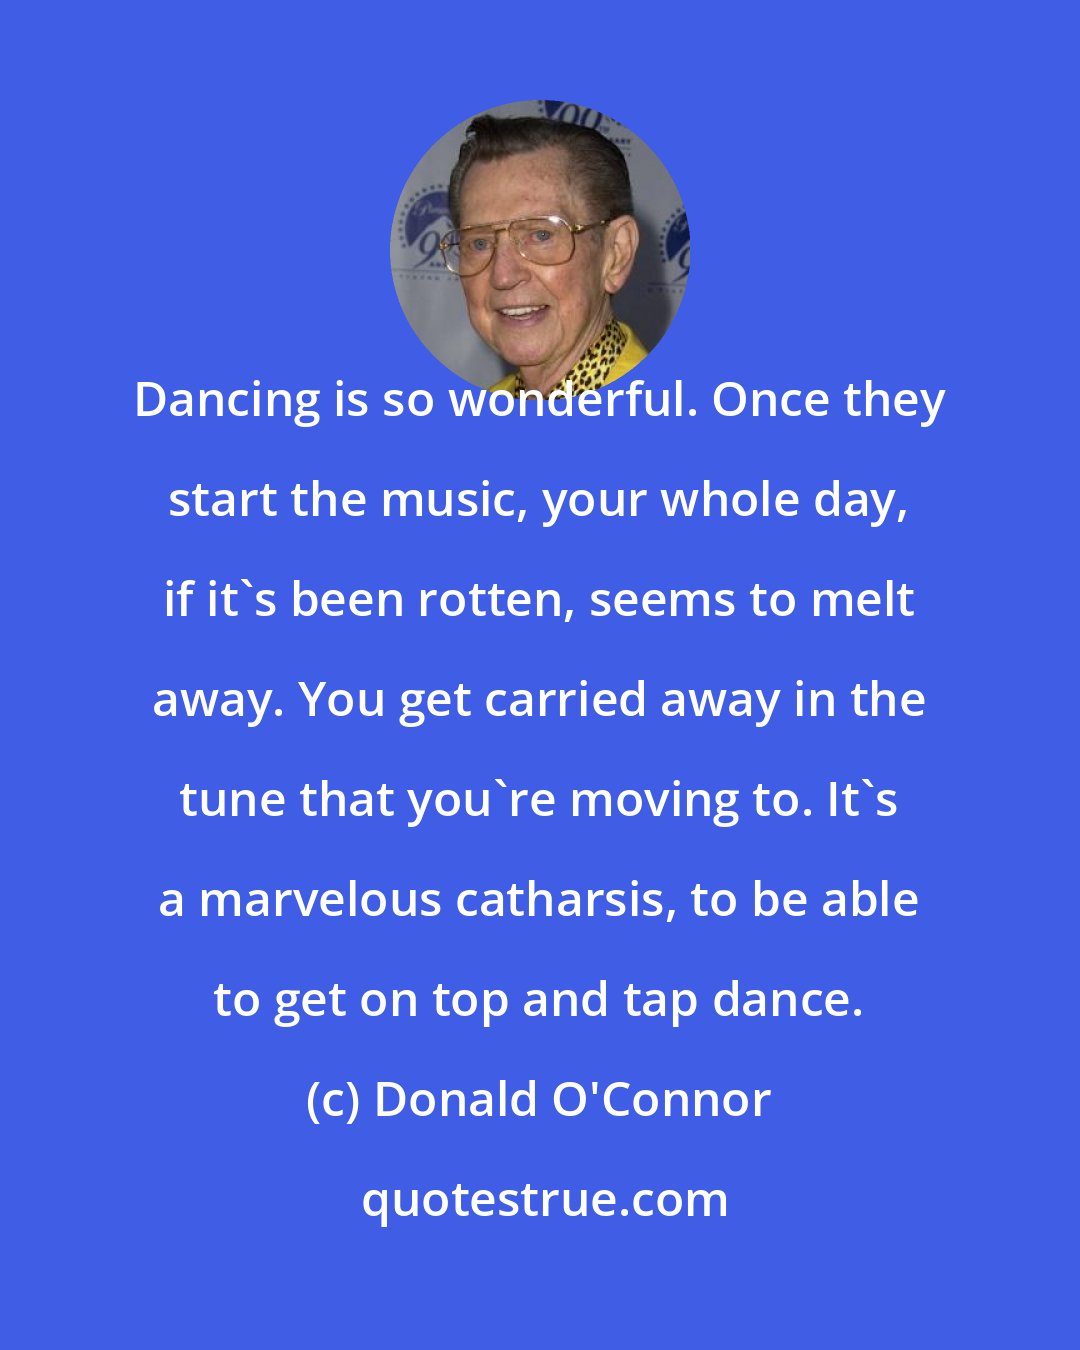 Donald O'Connor: Dancing is so wonderful. Once they start the music, your whole day, if it's been rotten, seems to melt away. You get carried away in the tune that you're moving to. It's a marvelous catharsis, to be able to get on top and tap dance.